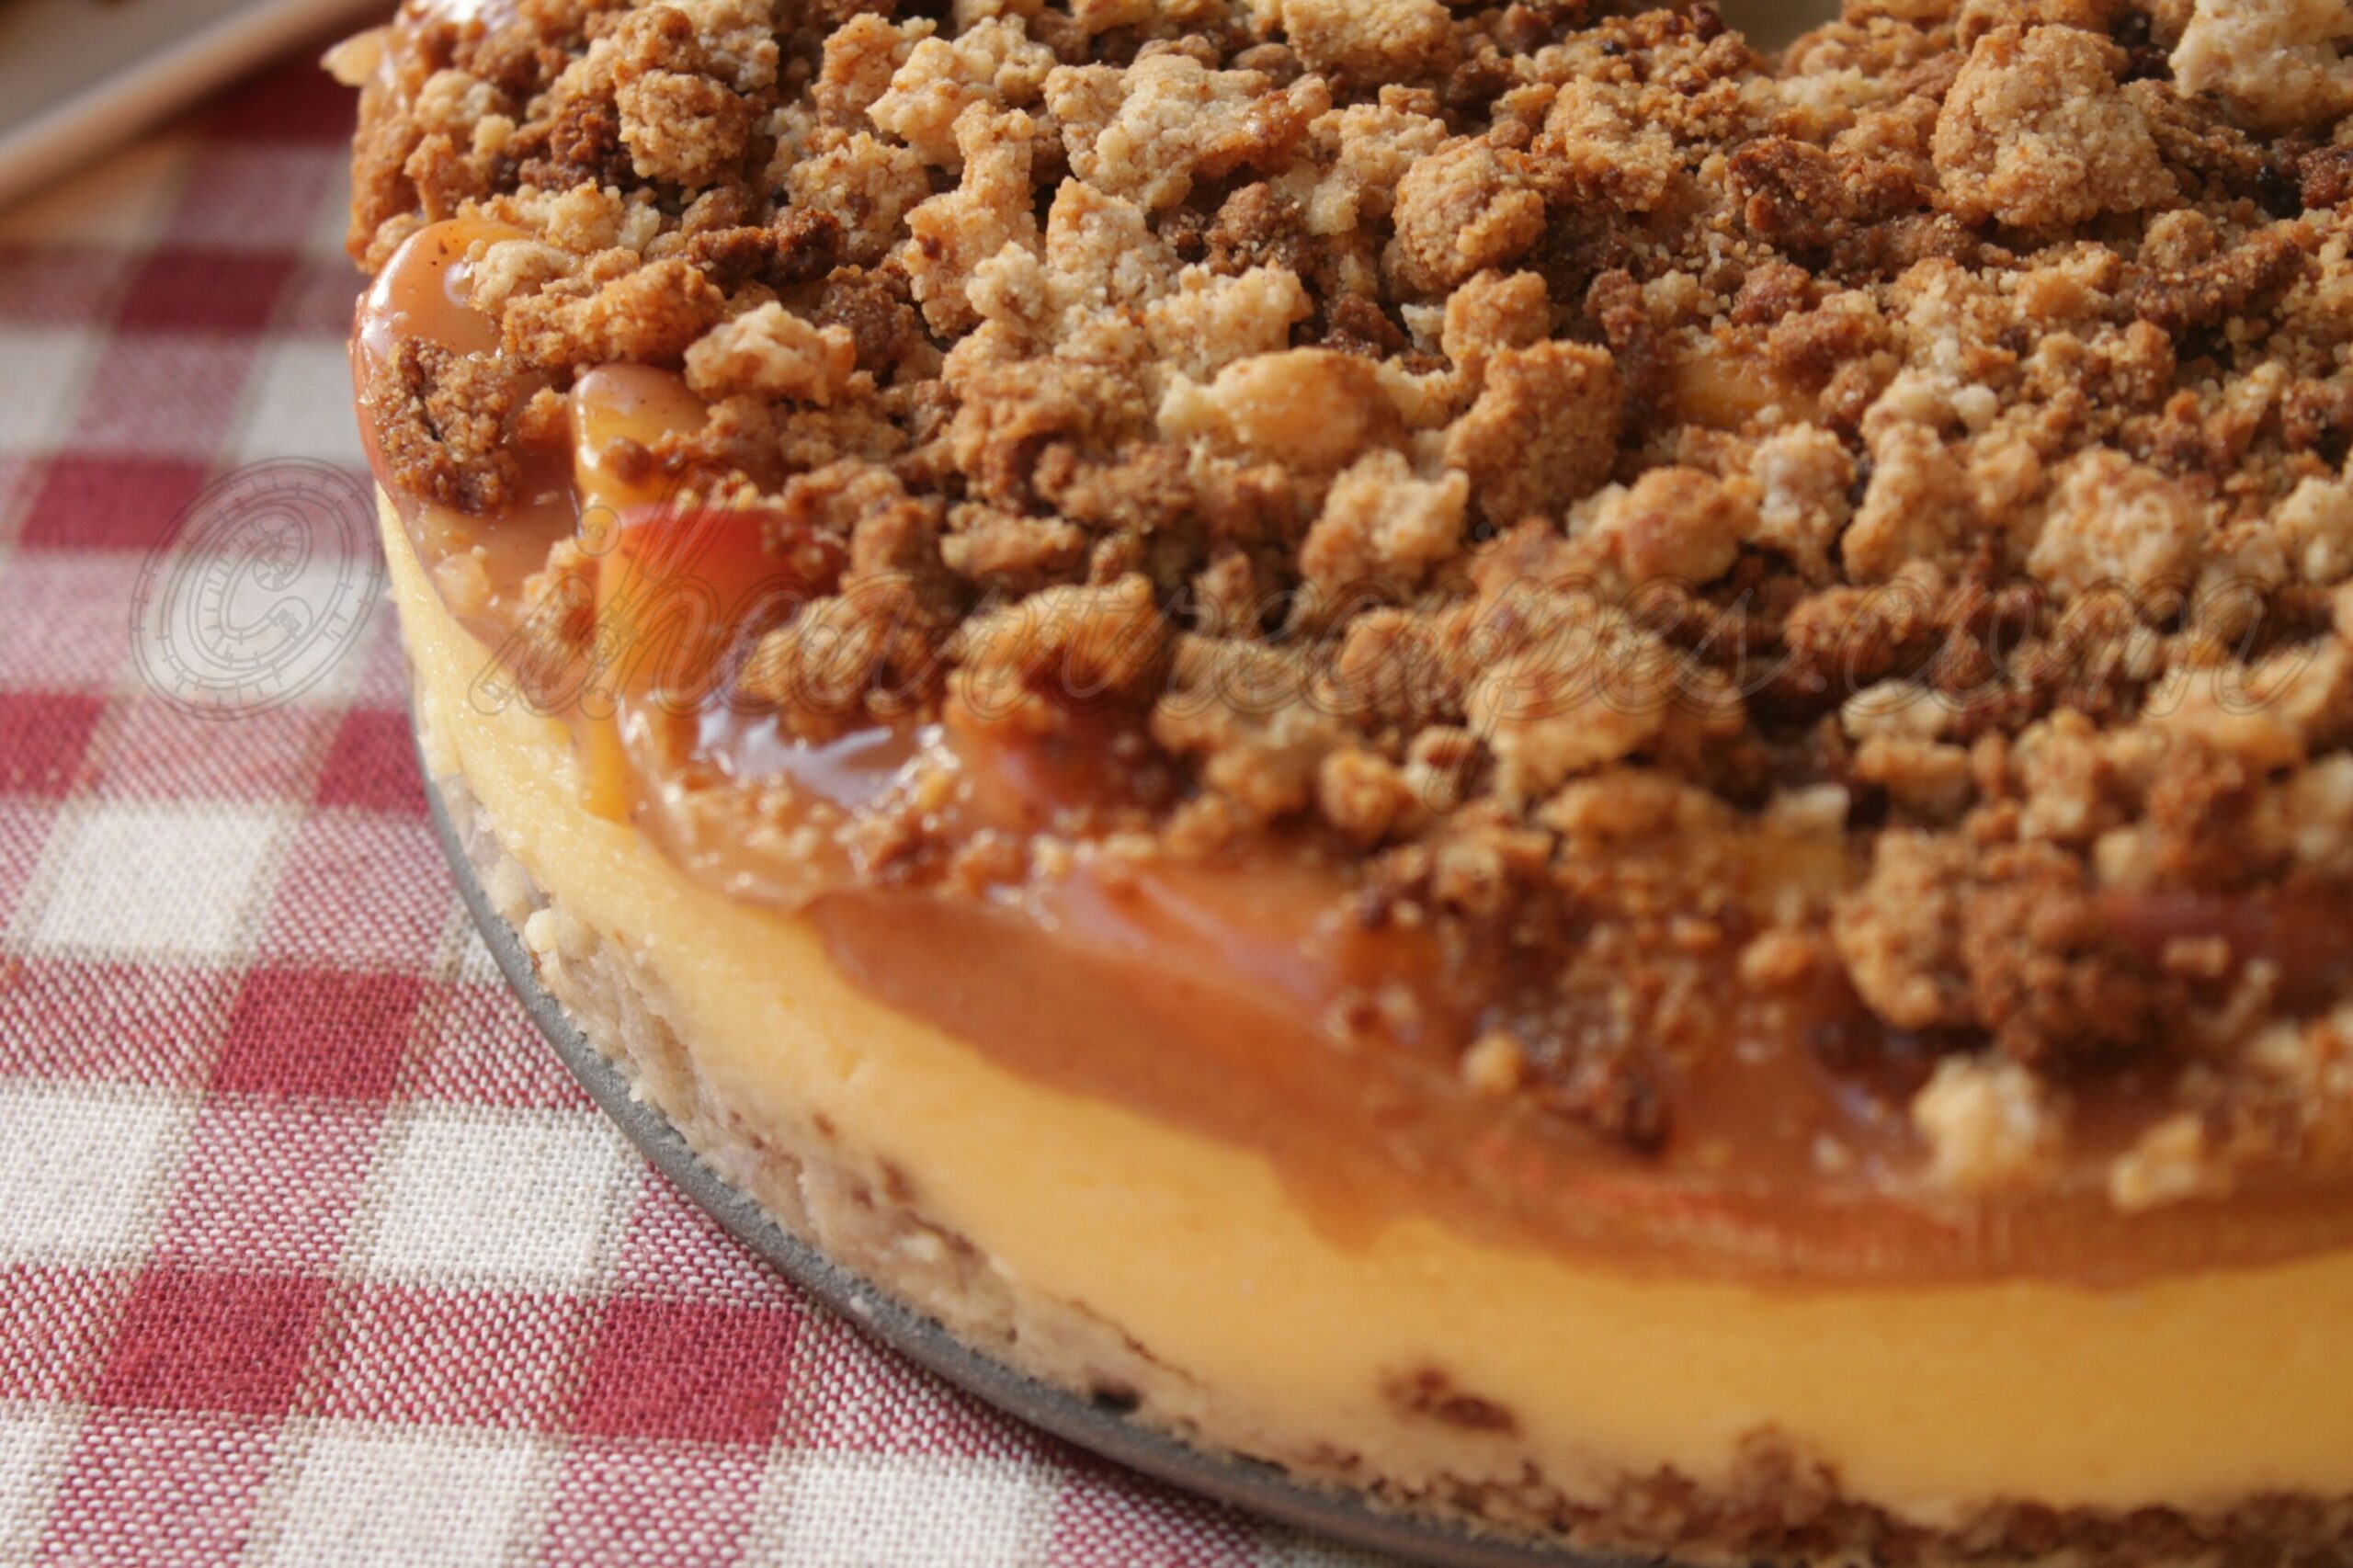 A close-up look at a homemade peach cobbler cheesecake with layers of fresh peach cobbler filling and creamy cheesecake, topped with a classic cobbler crumble topping.